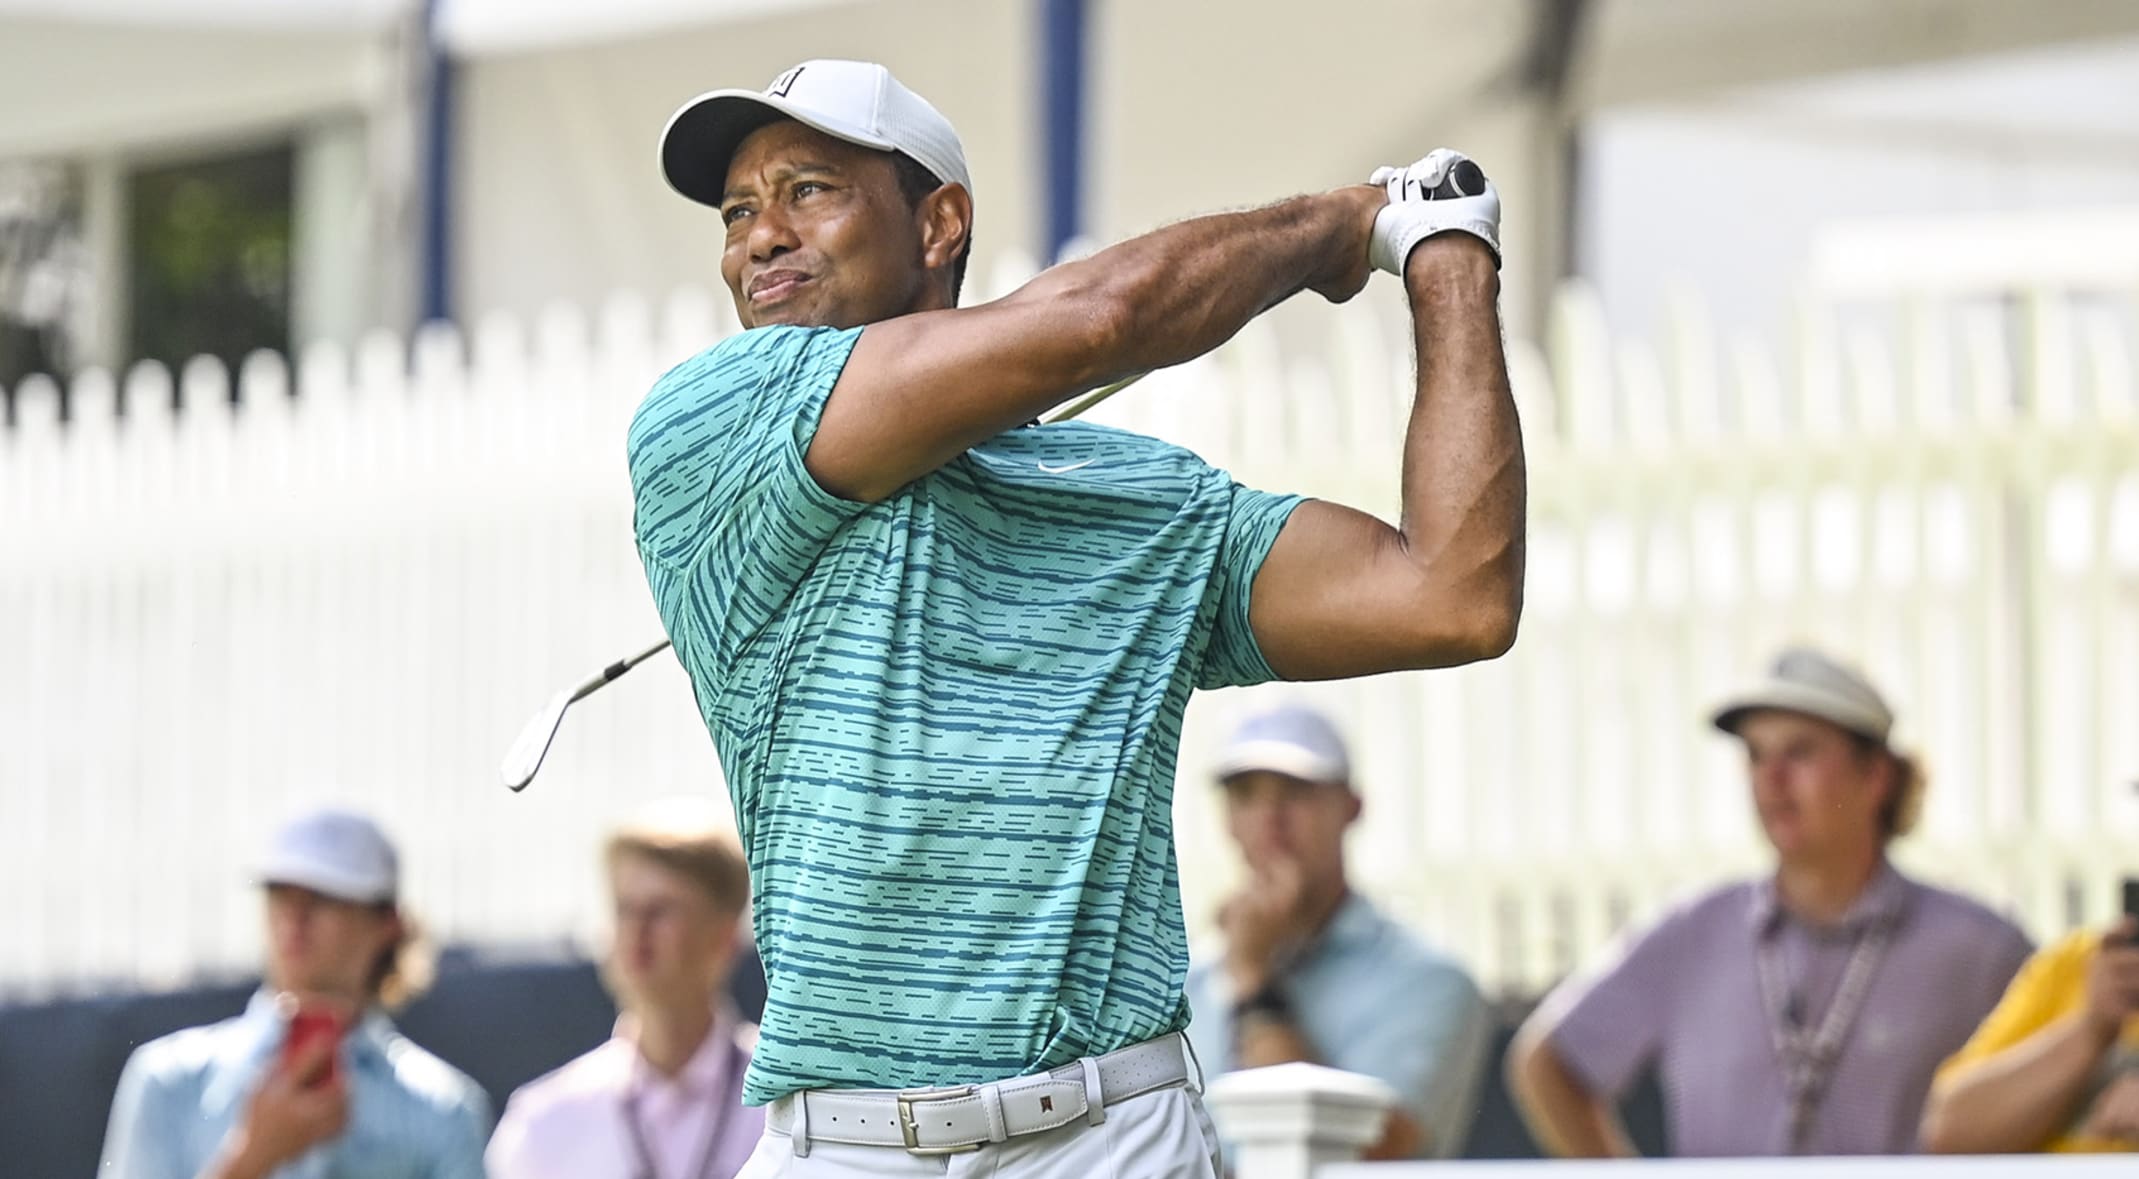 Tiger Woods May Compete At Master's After Reportedly Practicing